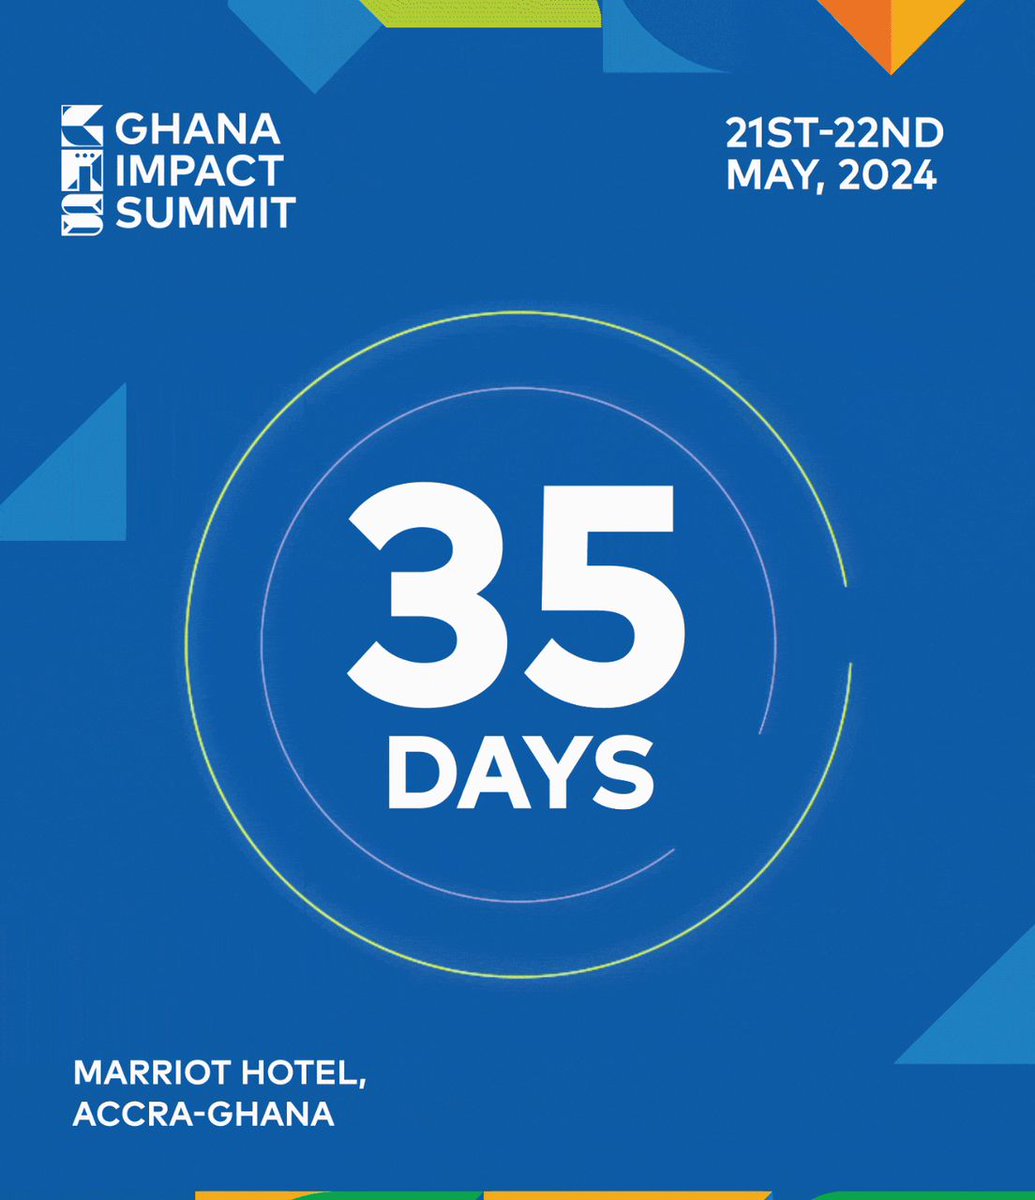 (1/2) The countdown is on! 35 days till the 3rd Ghana Impact Summit. How do we build resilient ecosystems for a thriving impact economy? What practical steps do we need to take to create the change we want to see? Join us on the 21st and 22nd of May, 2024 at the Marriot Hotel -